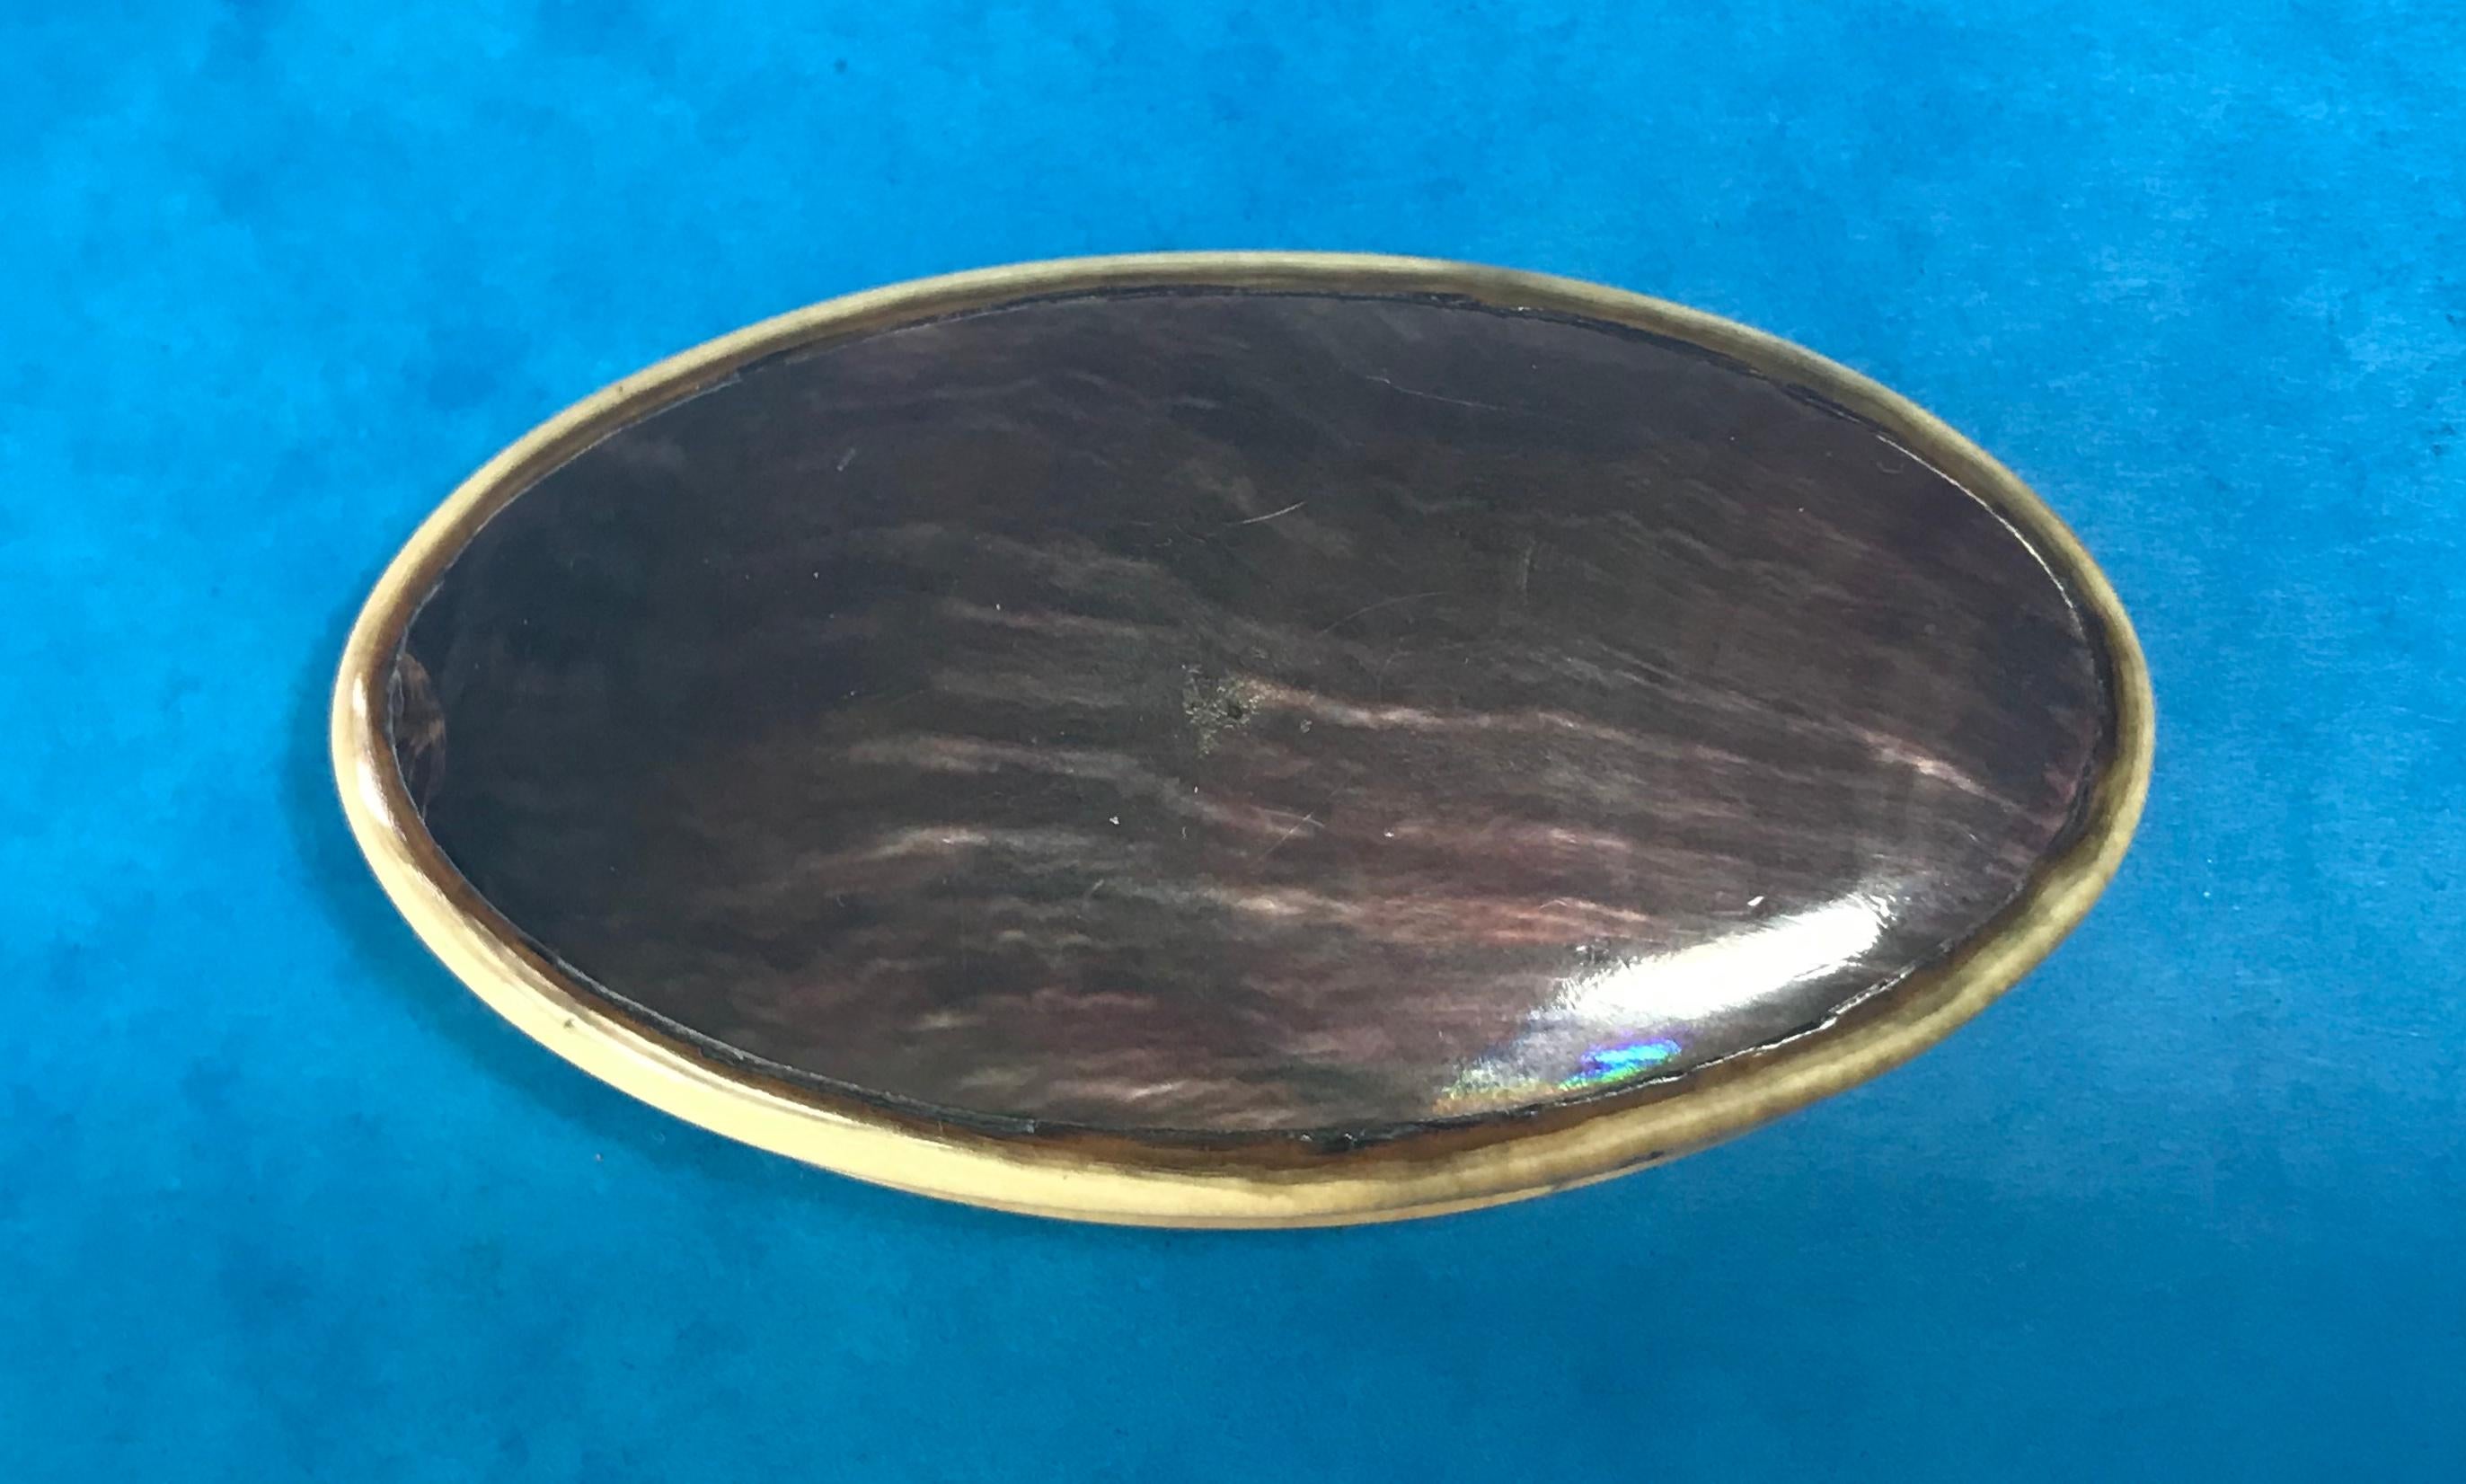 Unusual 18th century snuff box.
The snuff box is a dark shade of mother of pearl and horn around the rim and underneath of the box. It dates back to circa 1750.
The snuff box measures 10 by 6 and stands 2cm high.